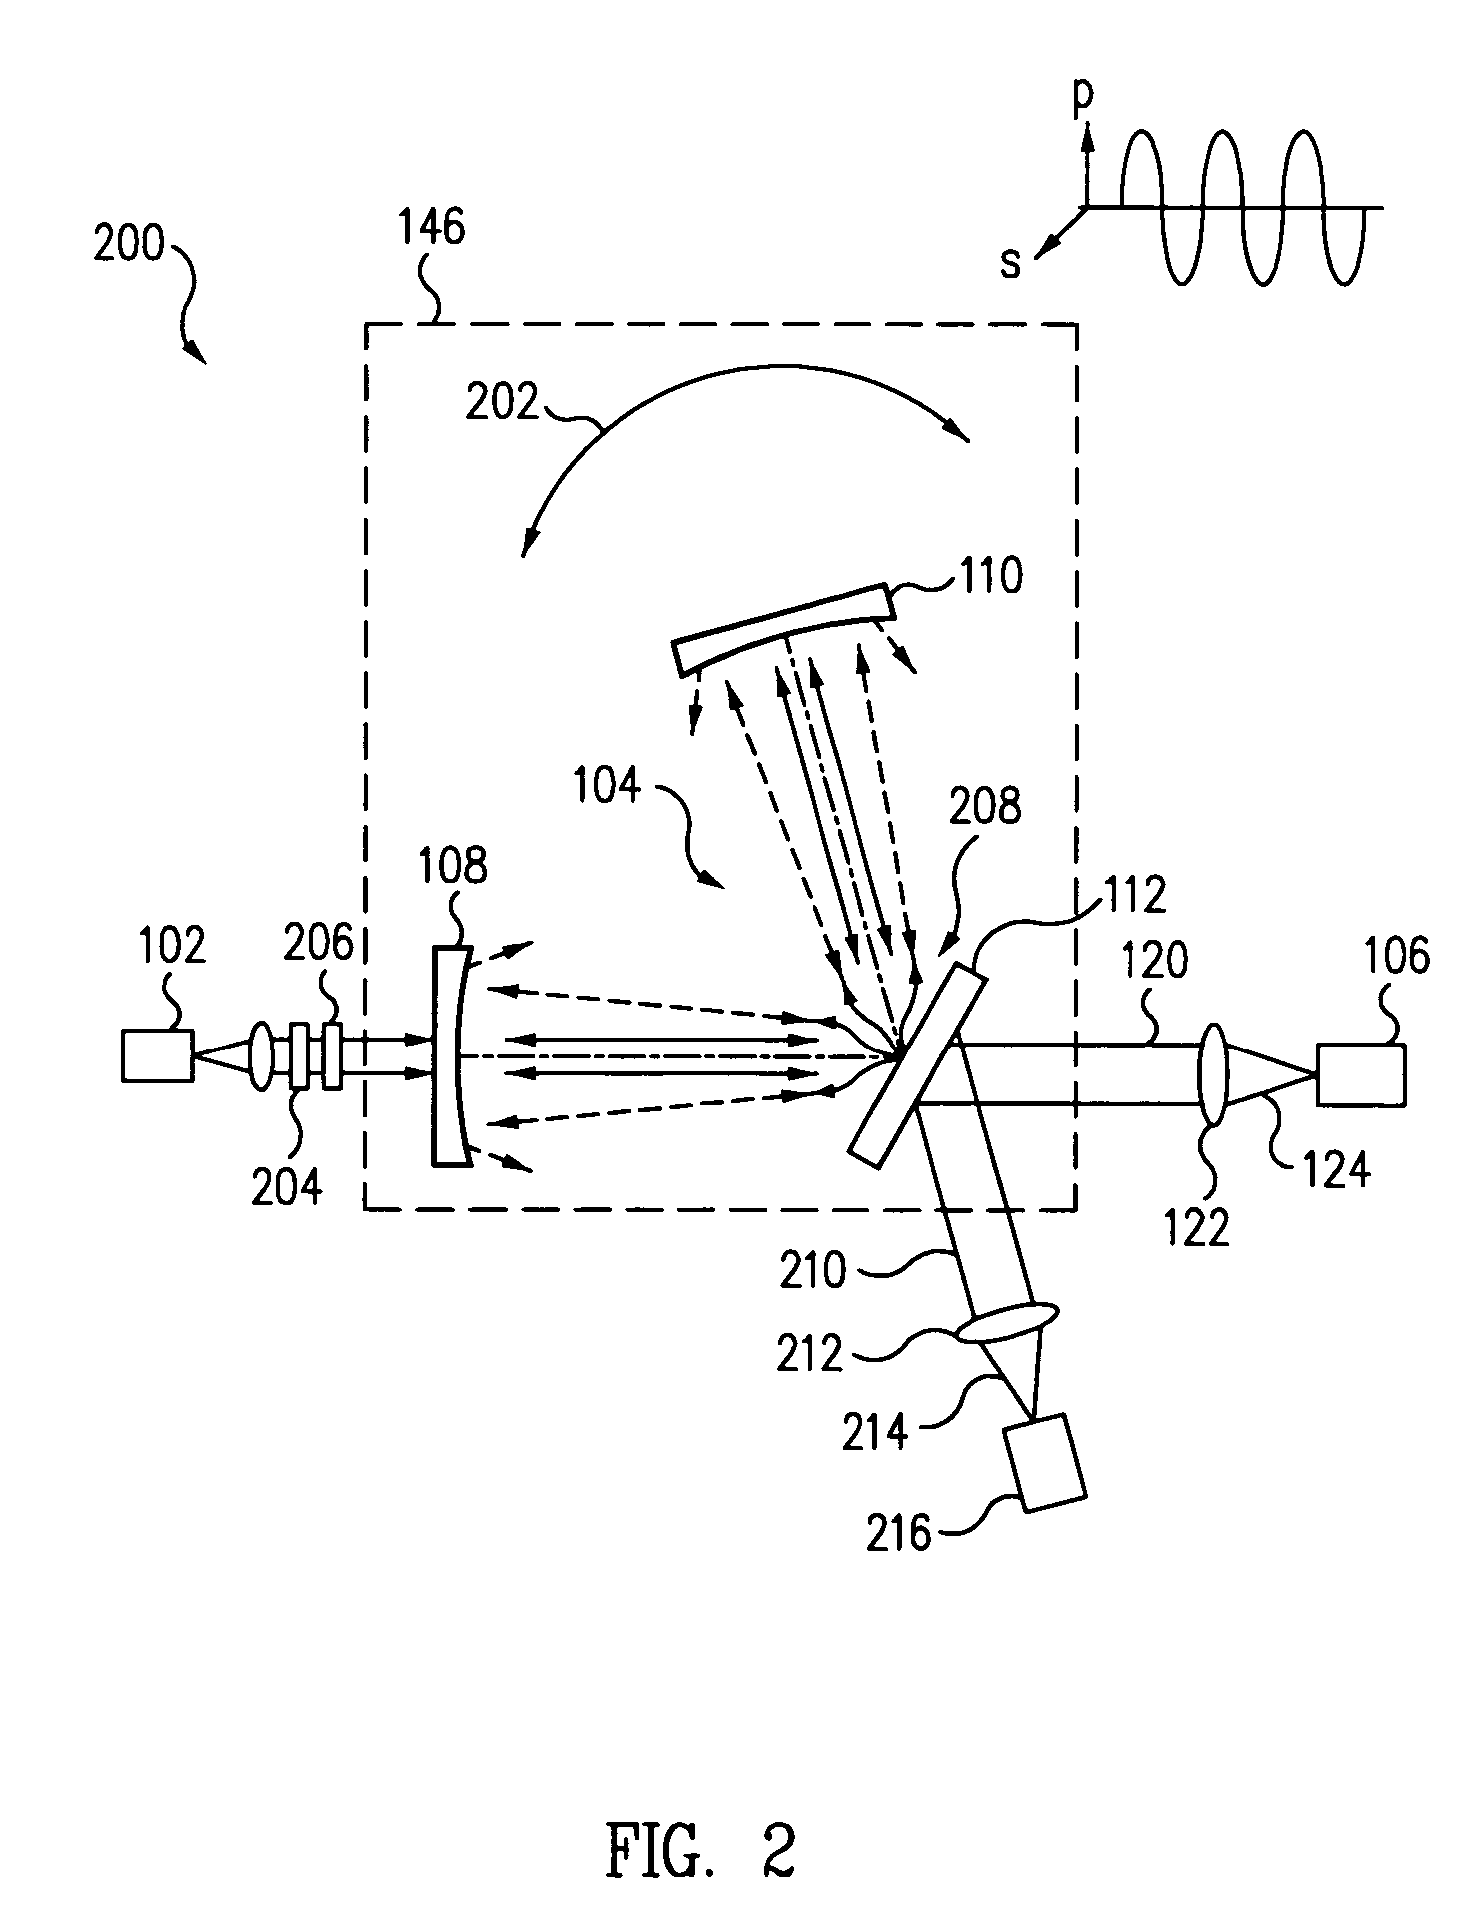 Light scatter measurement apparatus and method